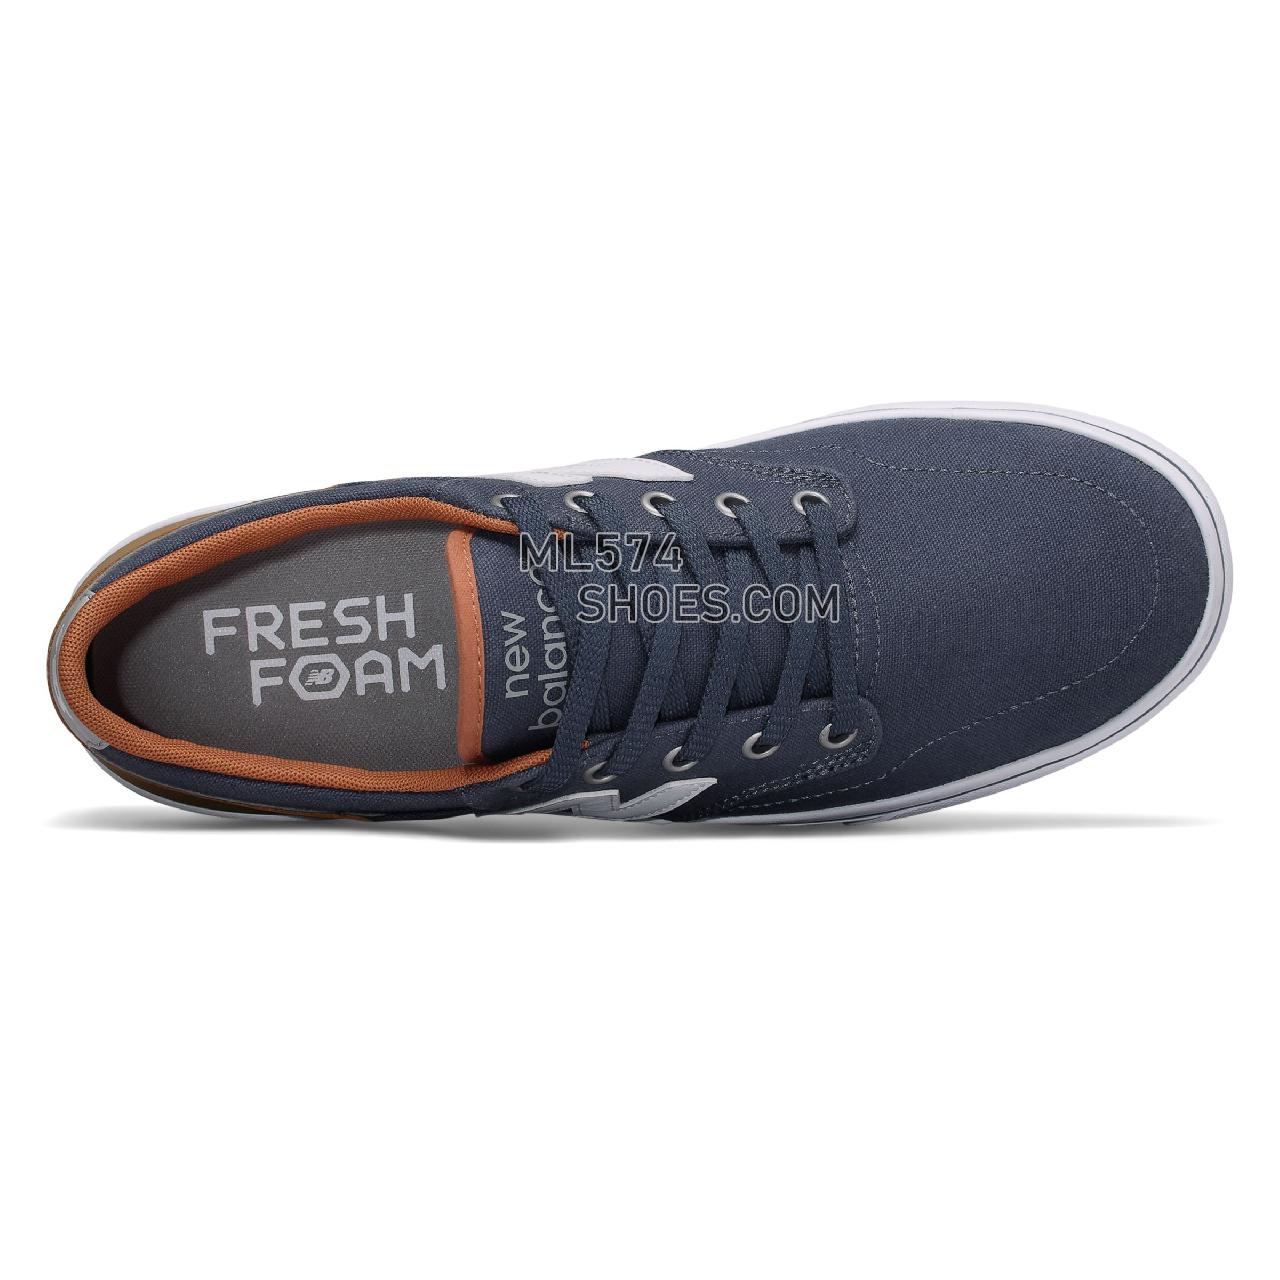 New Balance All Coasts 331 - Men's Court Classics - Navy with White and Gum - AM331NYO